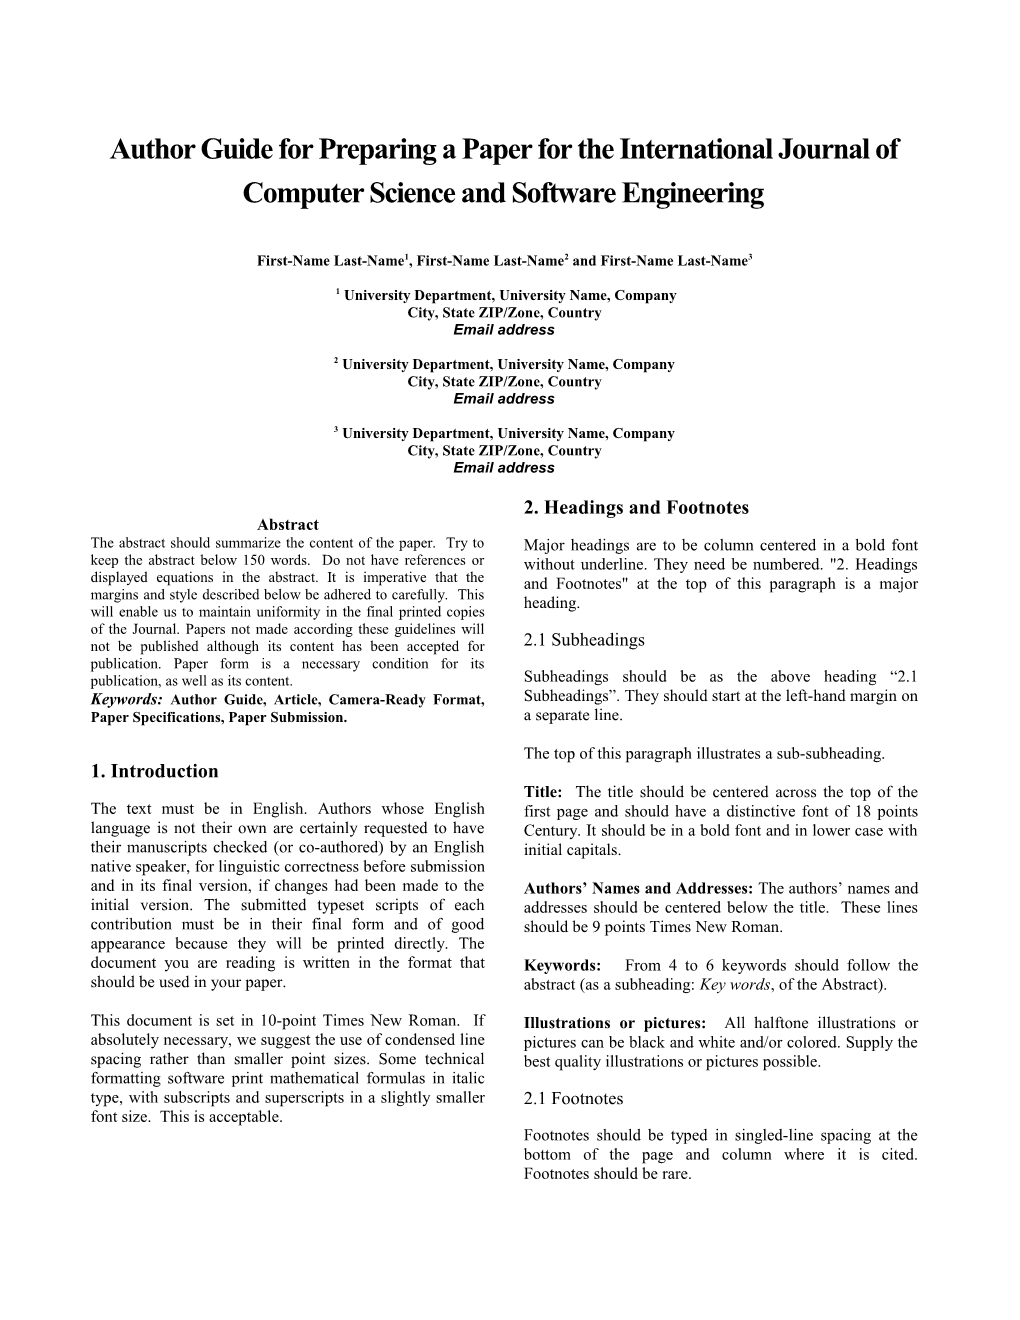 Author Guide for Preparing a Paper for the International Journal of Computer Scienceand